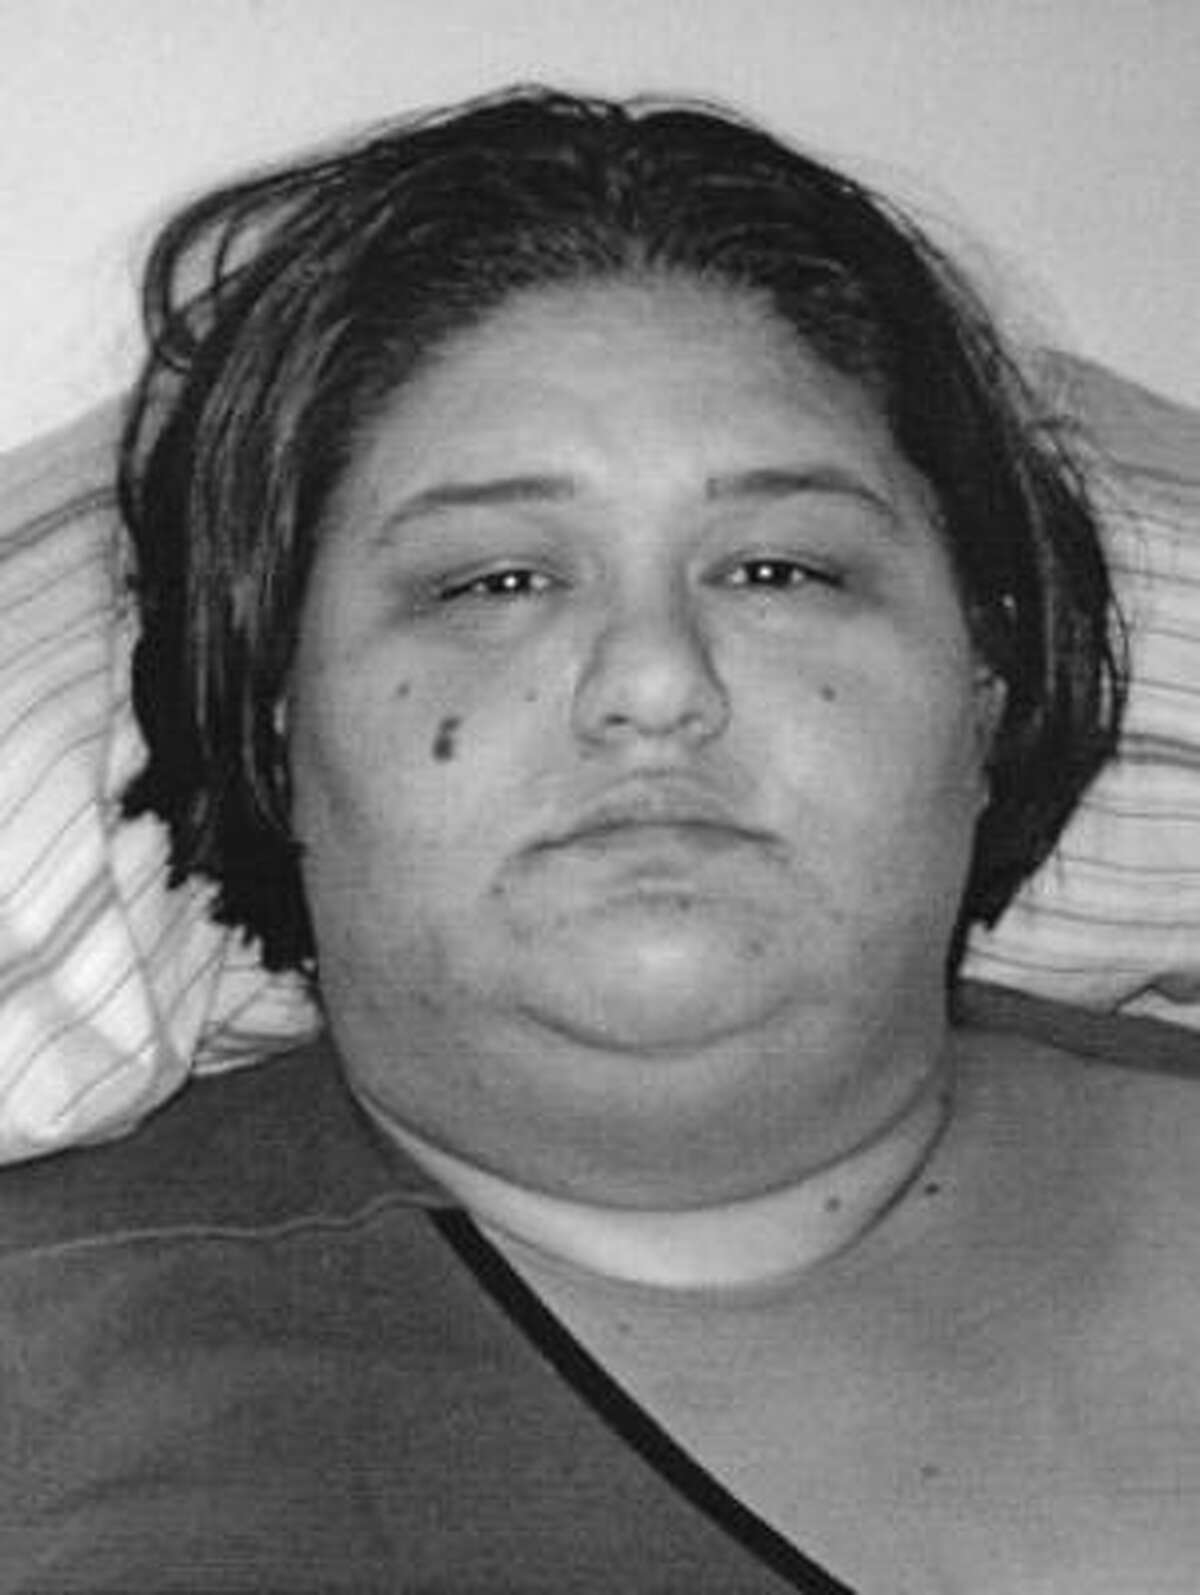 A judge says it was still unclear who would transport Mayra Lizbeth Rosales to court.